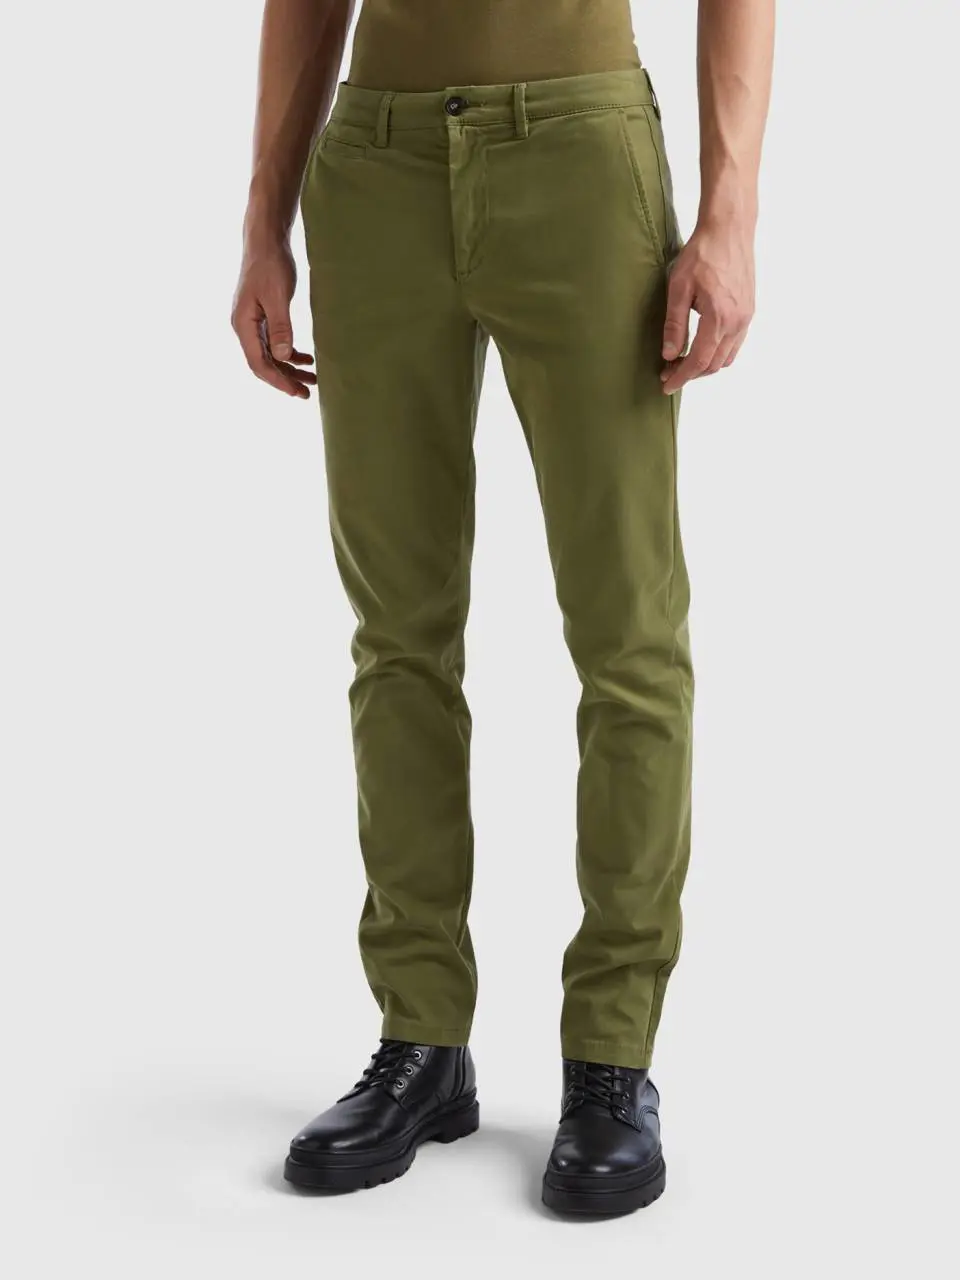 Benetton military green slim fit chinos. 1